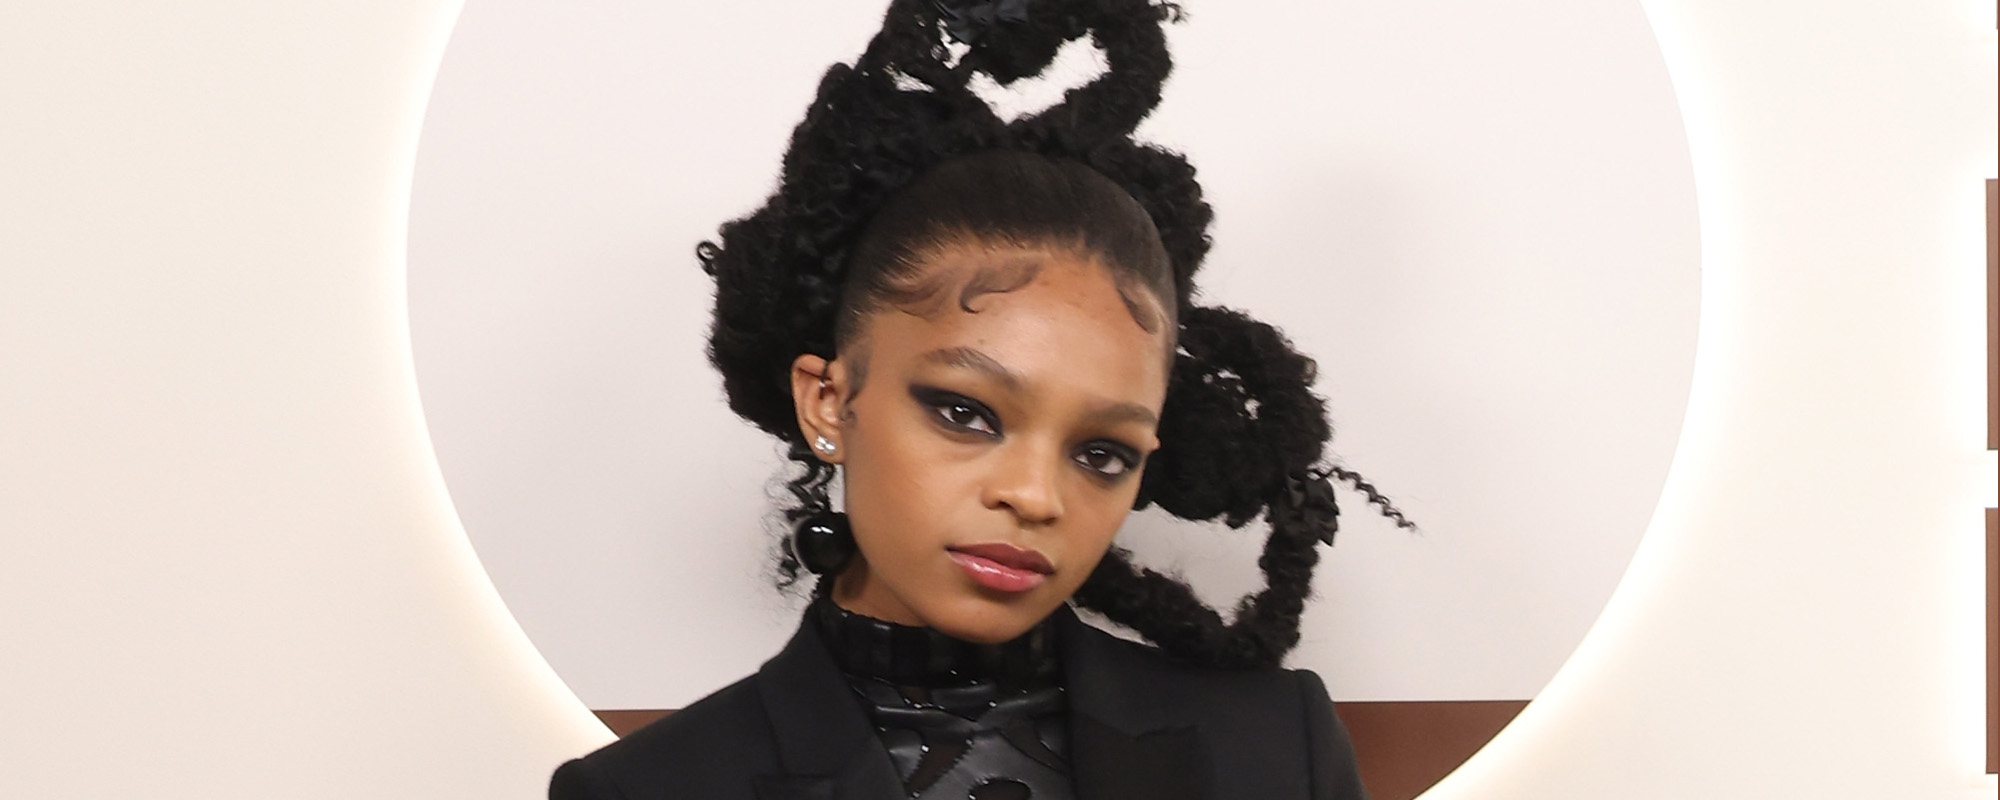 Lauryn Hill’s Daughter, Bob Marley’s Granddaughter, Selah Marley Talks Wearing White Lives Matter T-Shirt—“You Can Not Bully Me”